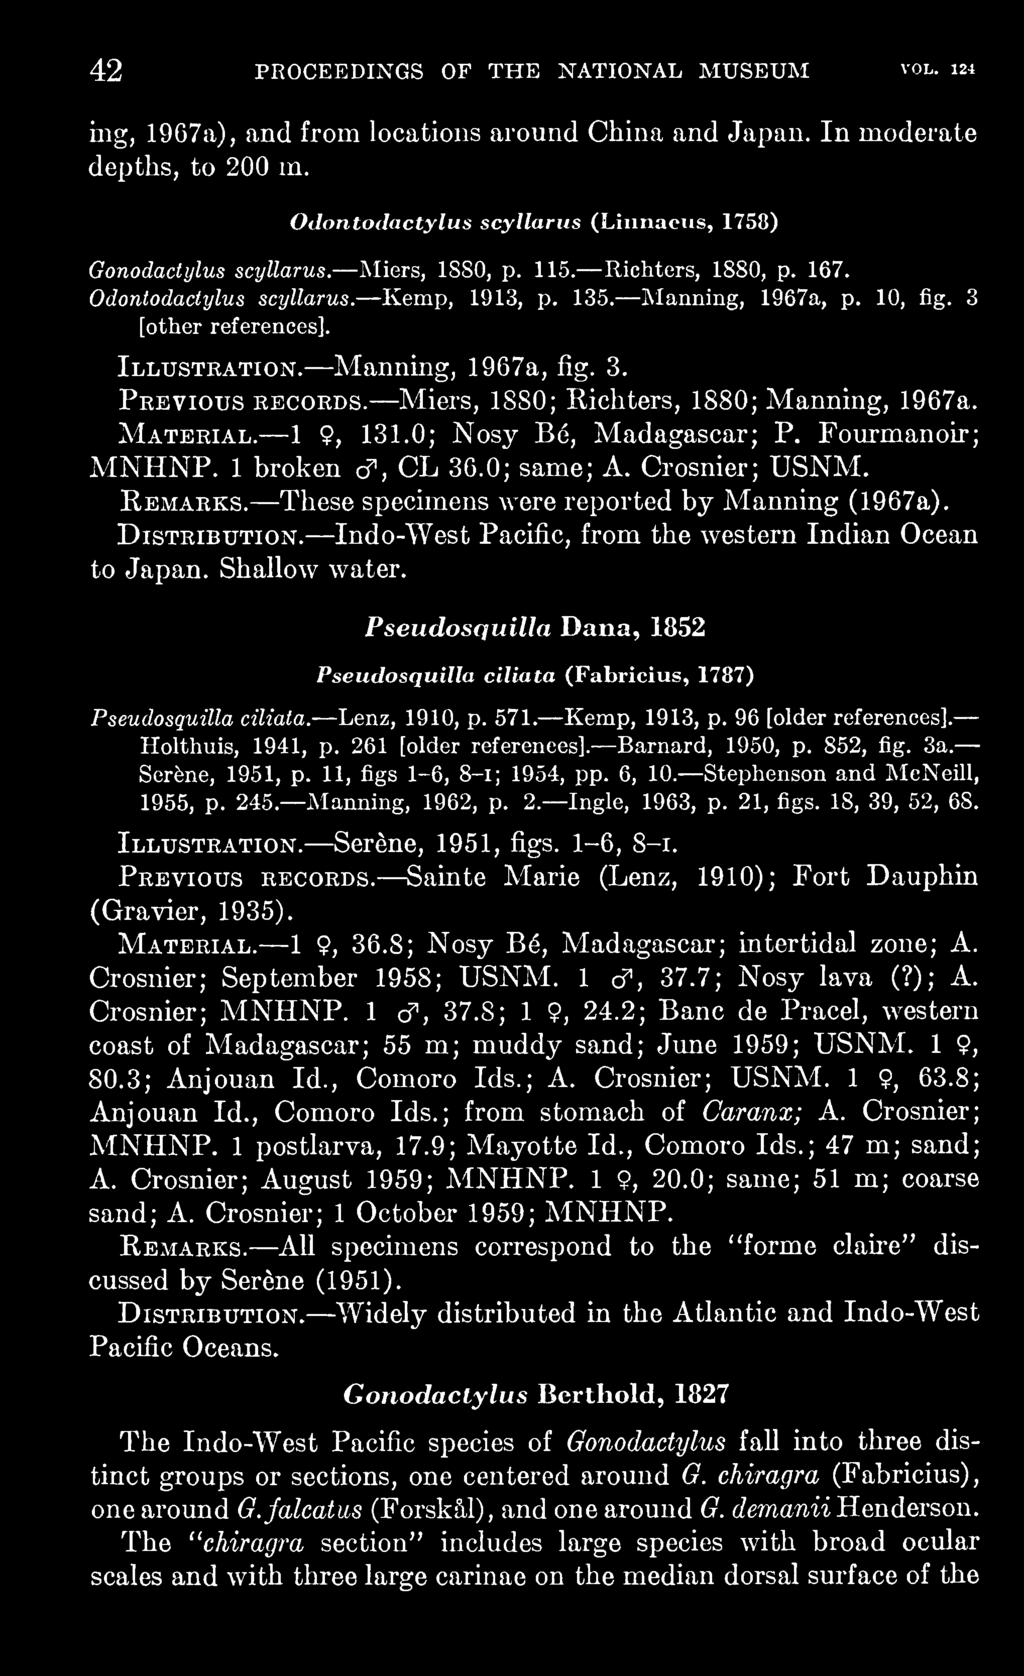 Miers, 1880; Richters, 1880; Manning, 1967a. Material. 1 9, 131.0; Nosy Be, Madagascar; P. Fourmanoir; 36.0; same; A. Crosnier; USNM. Remarks. These specimens were reported by Manning (1967a).